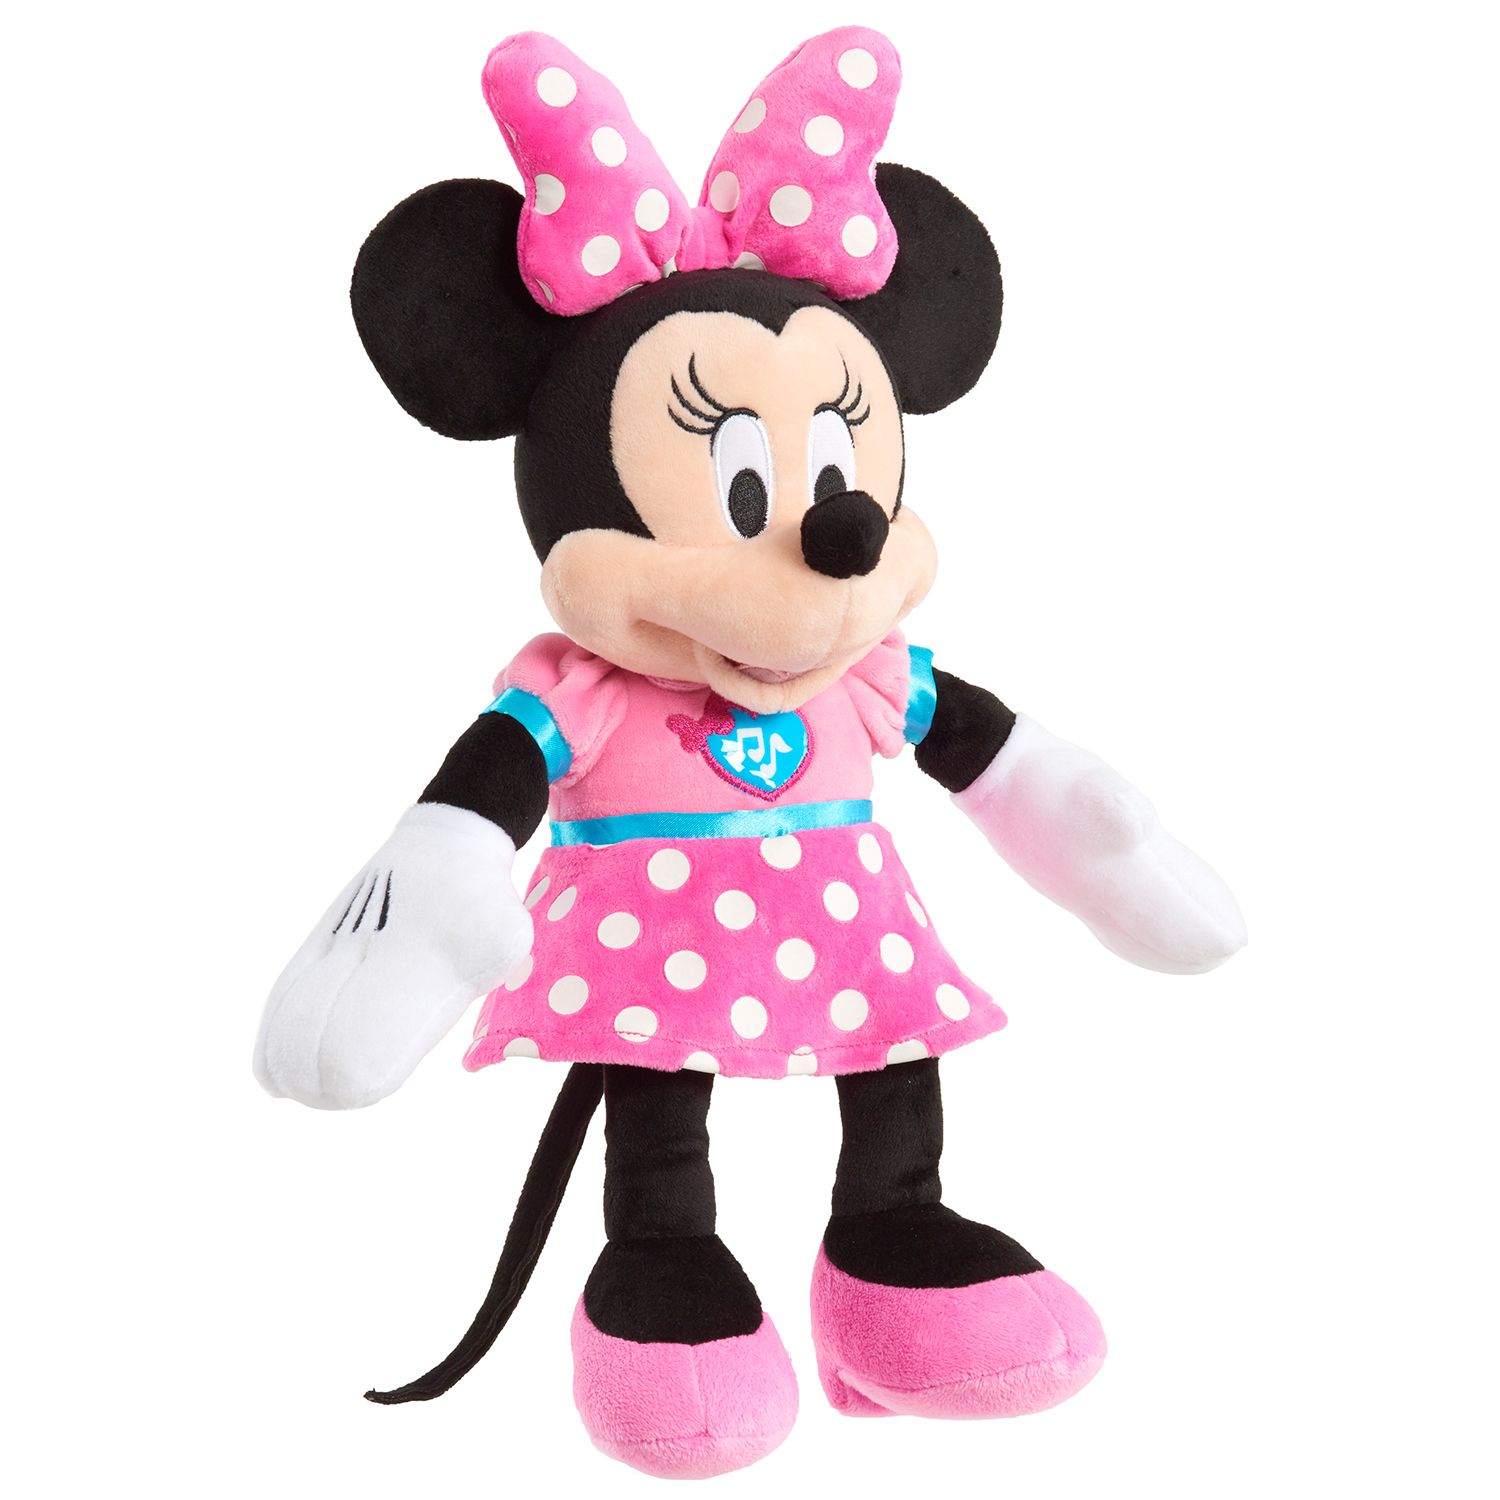 disney mickey mouse soft toy